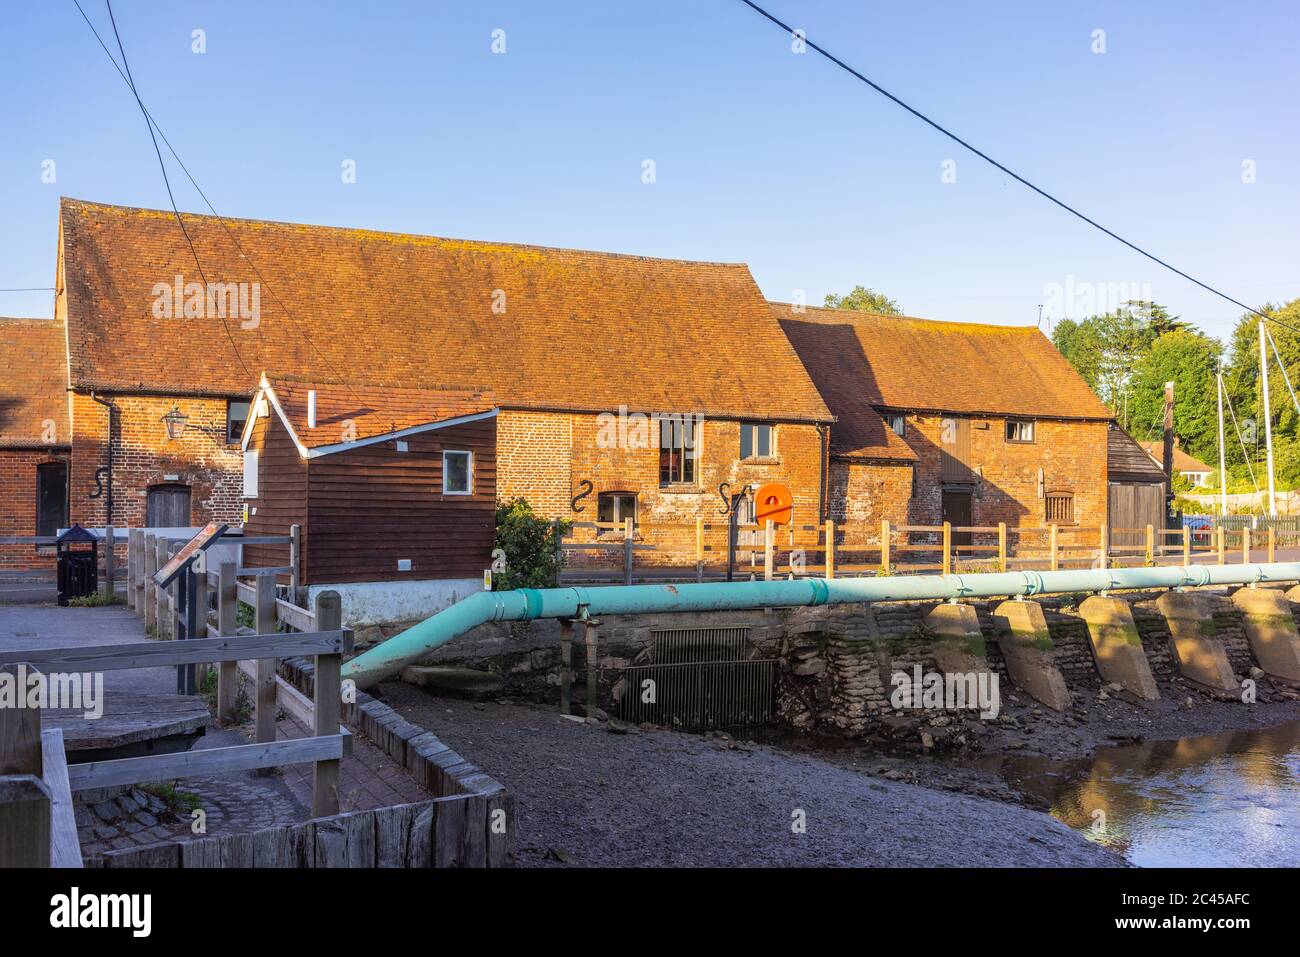 Eling Tide Mill -  a grade ii listed building museum in Eling part of Totton and Eling, New Forest, Hampshire, England, UK Stock Photo